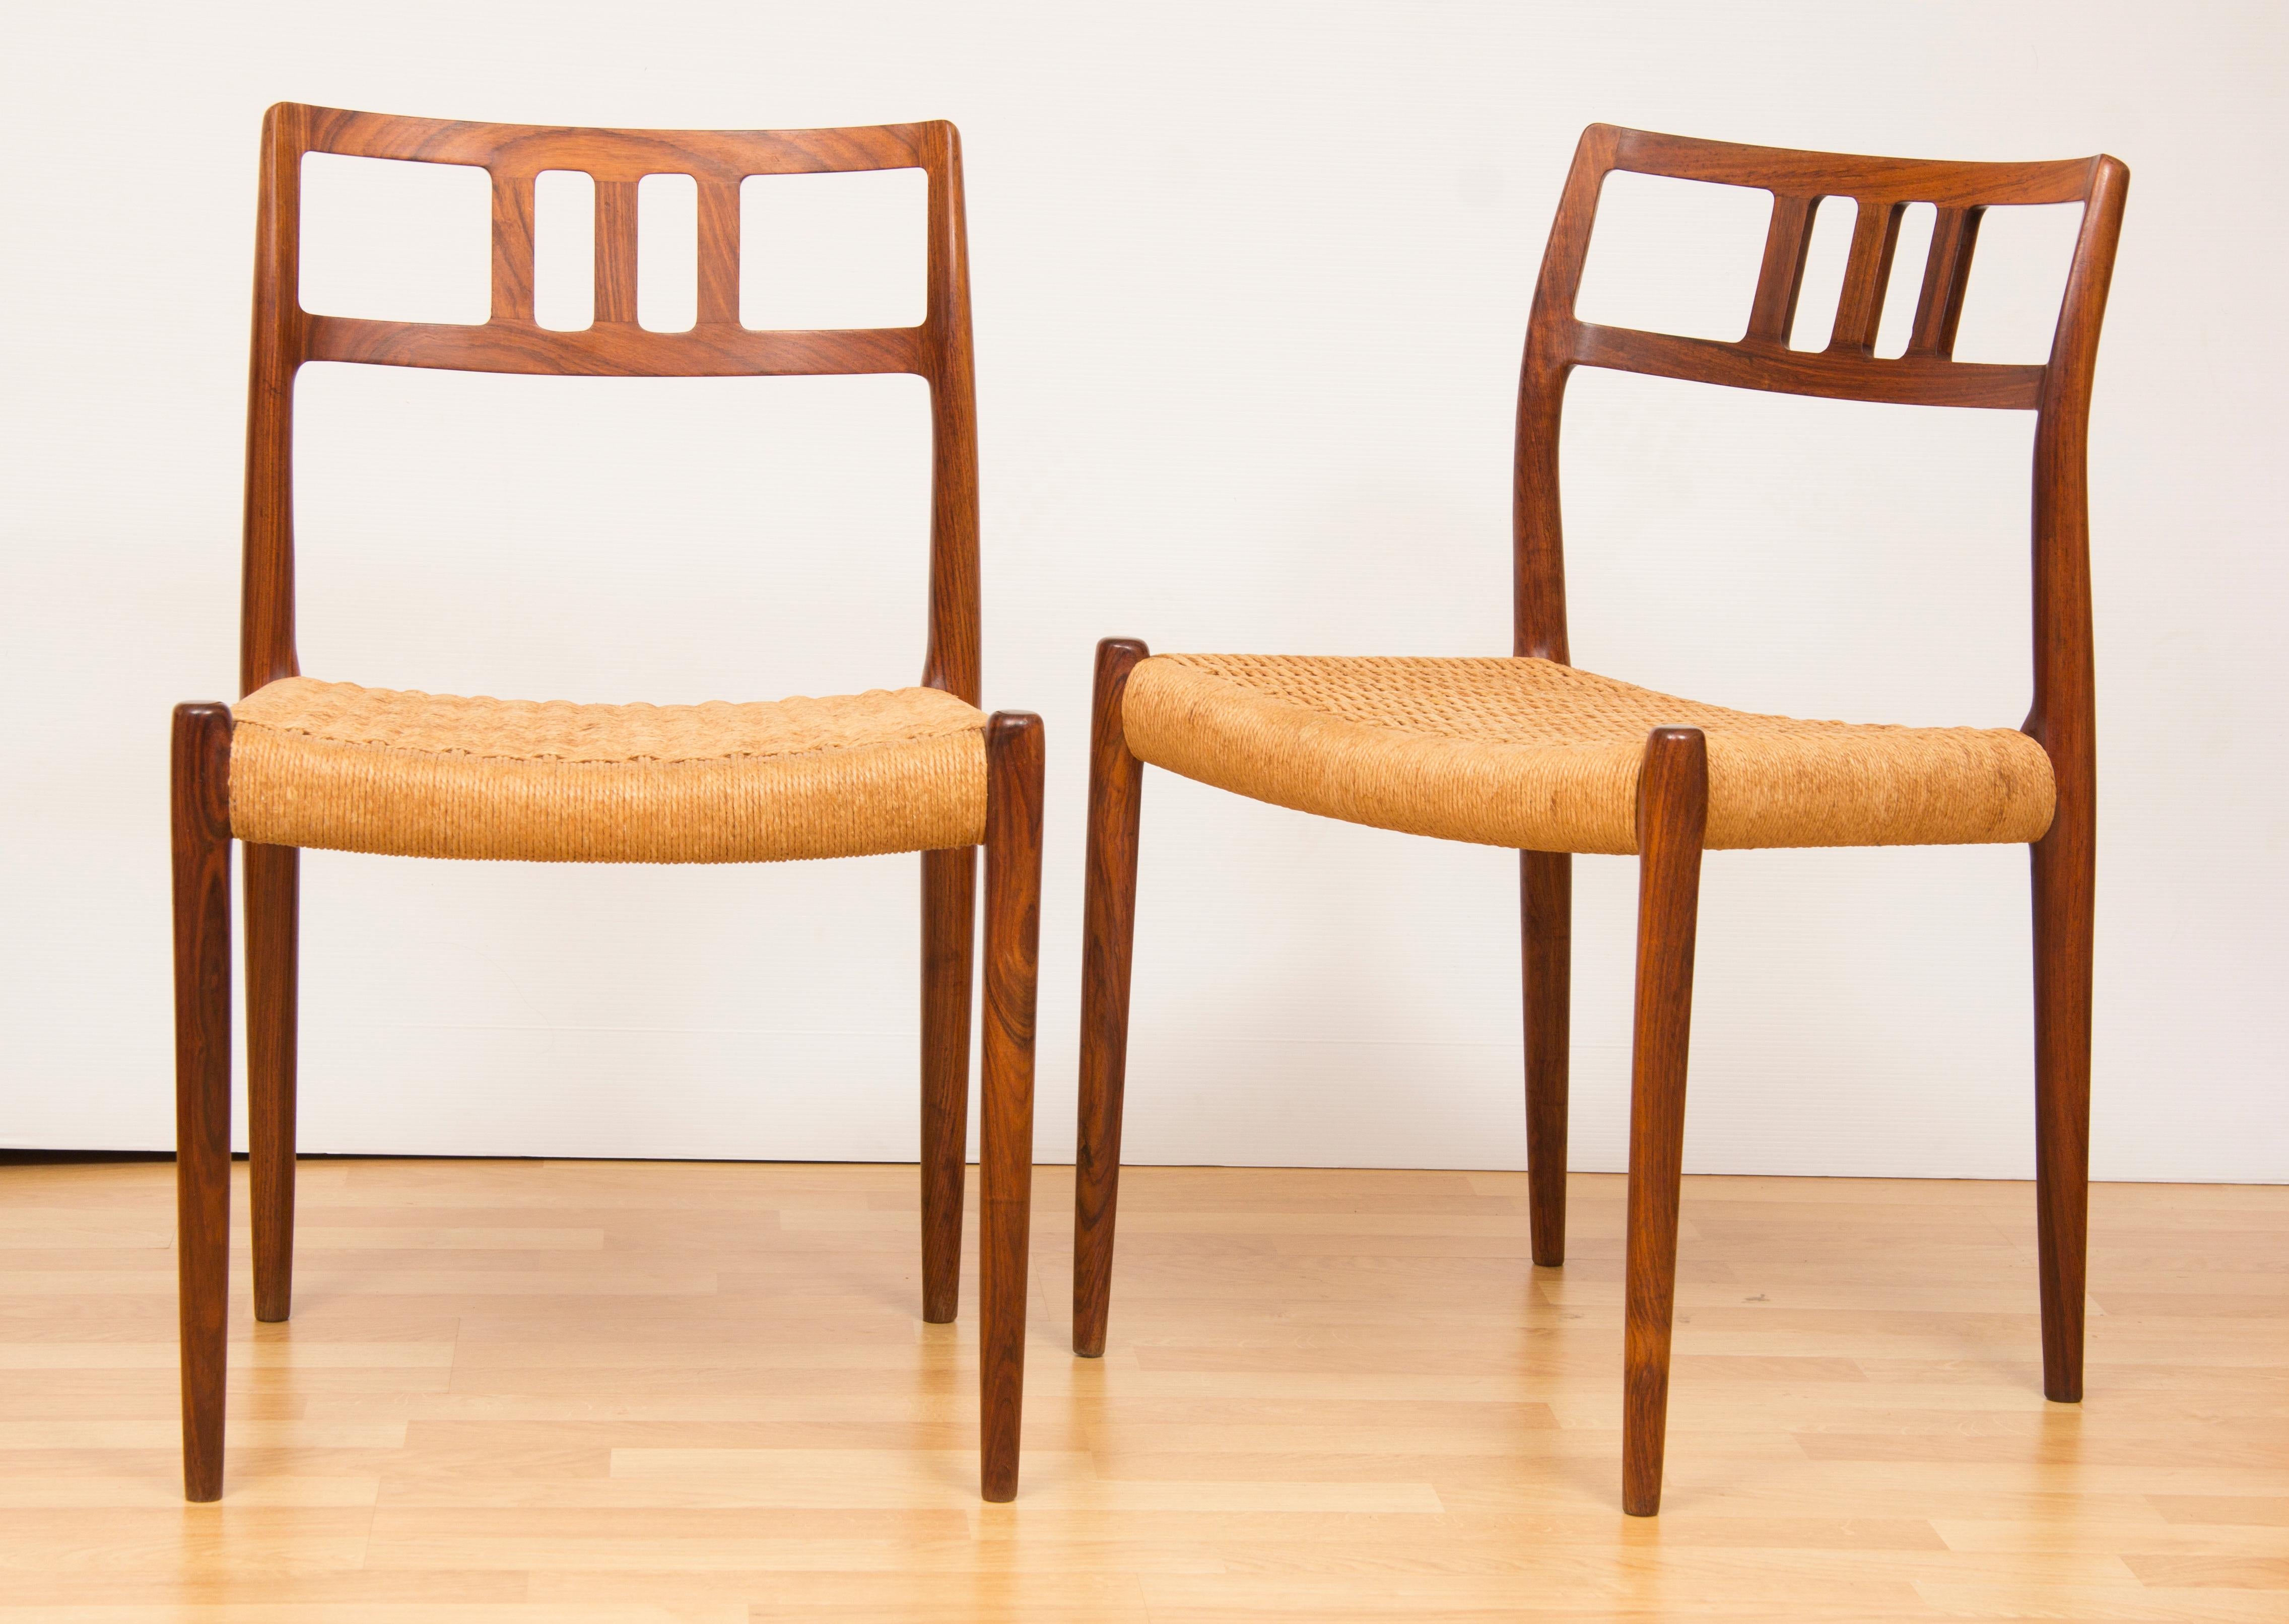 Set of 6 Danish Niels O. Møller Rosewood dining chairs with cord seats. Model 79 designed in 1966 and produced by JL Møller Møbelfabrik in Denmark. In very good vintage condition. The original cord seats do have some staining due to their past use